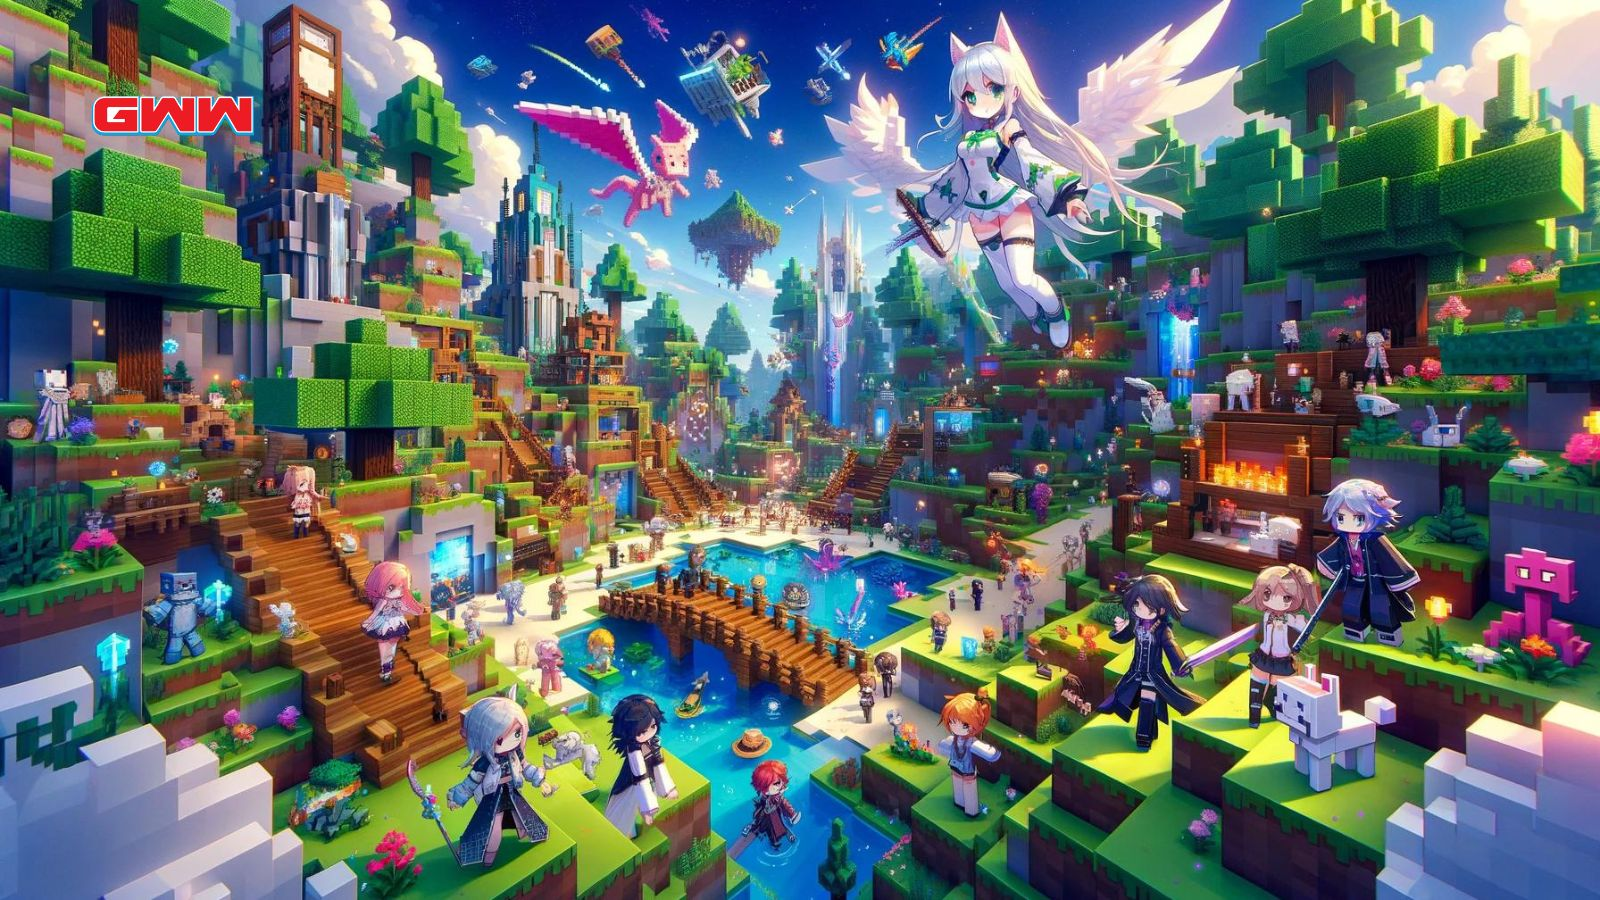 A vibrant, detailed scene of a virtual world that combines elements of anime. 